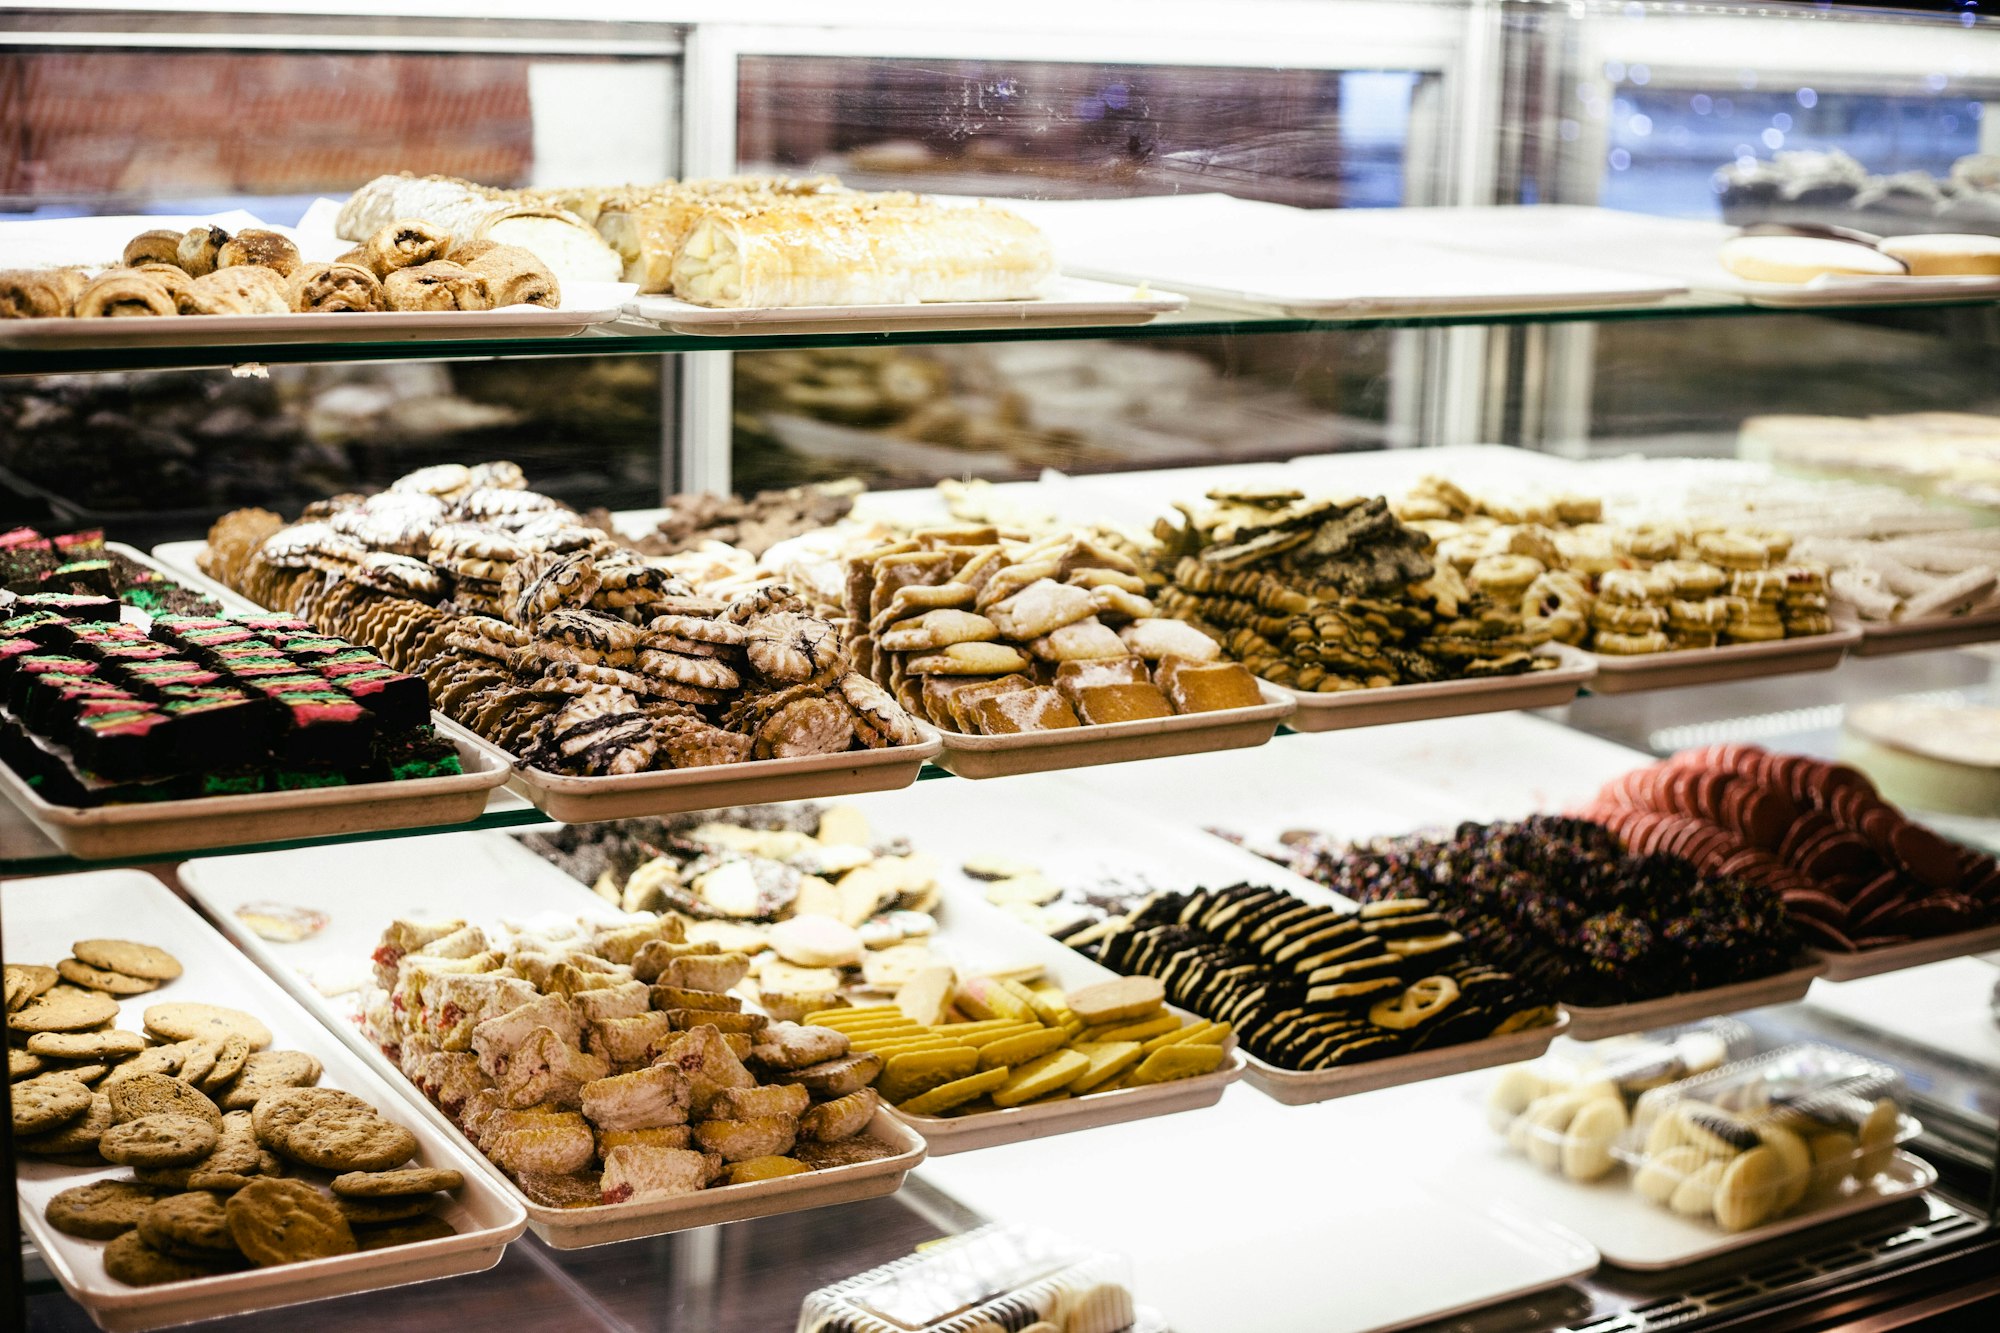 Trays of Baked Goods